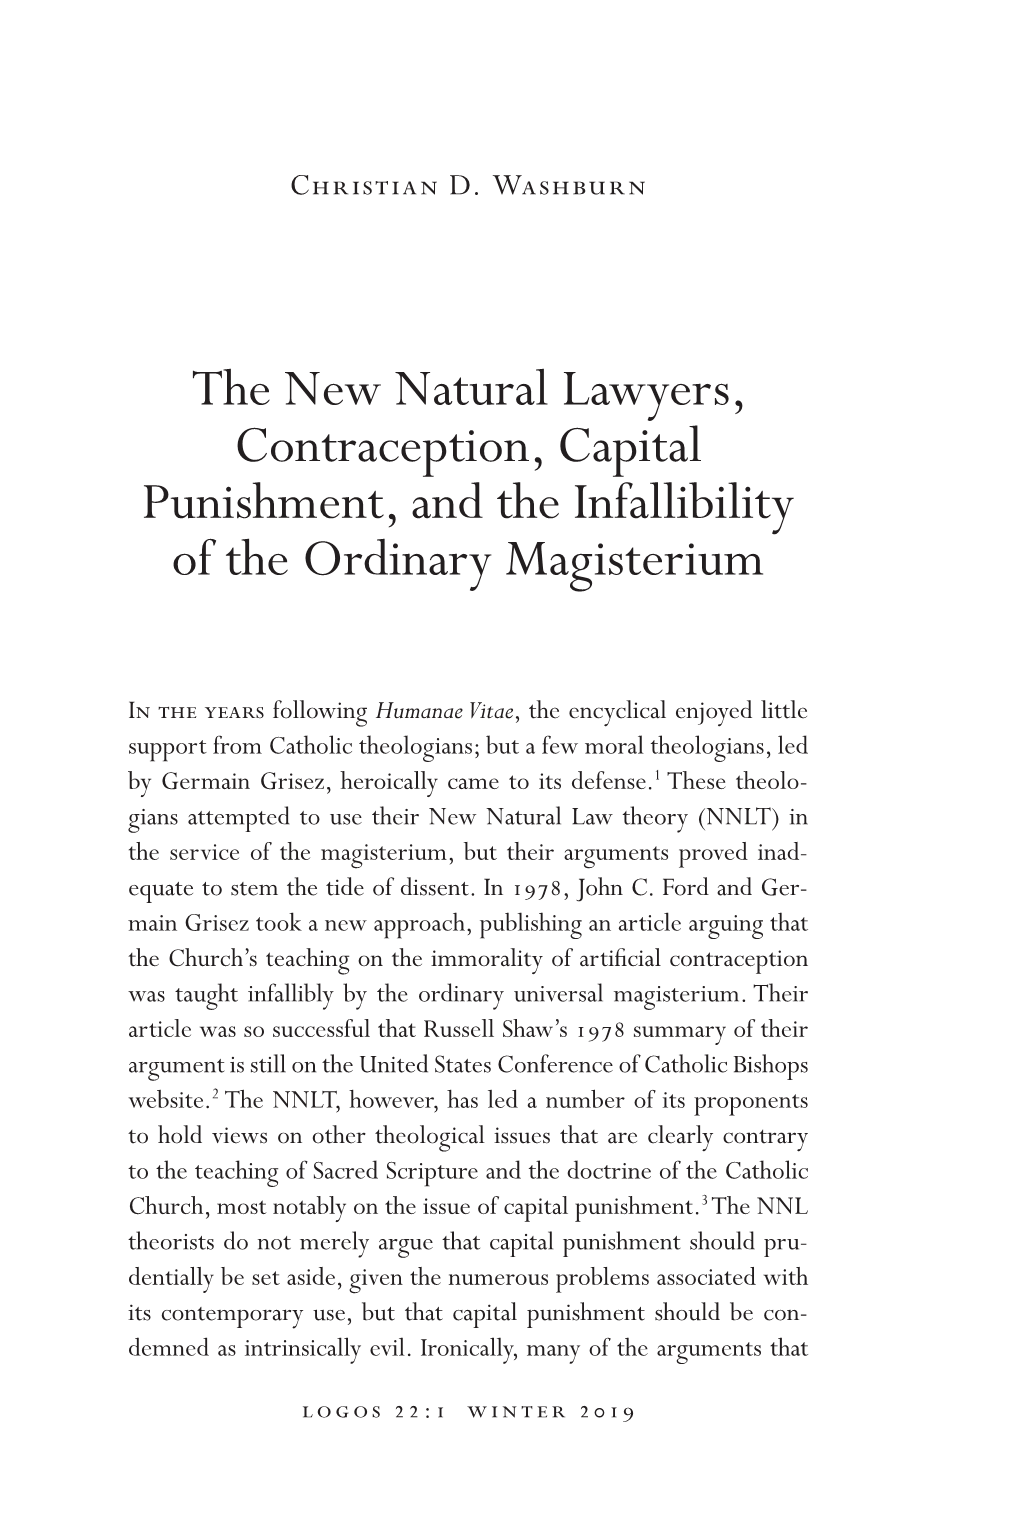 The New Natural Lawyers, Contraception, Capital Punishment, and the Infallibility of the Ordinary Magisterium